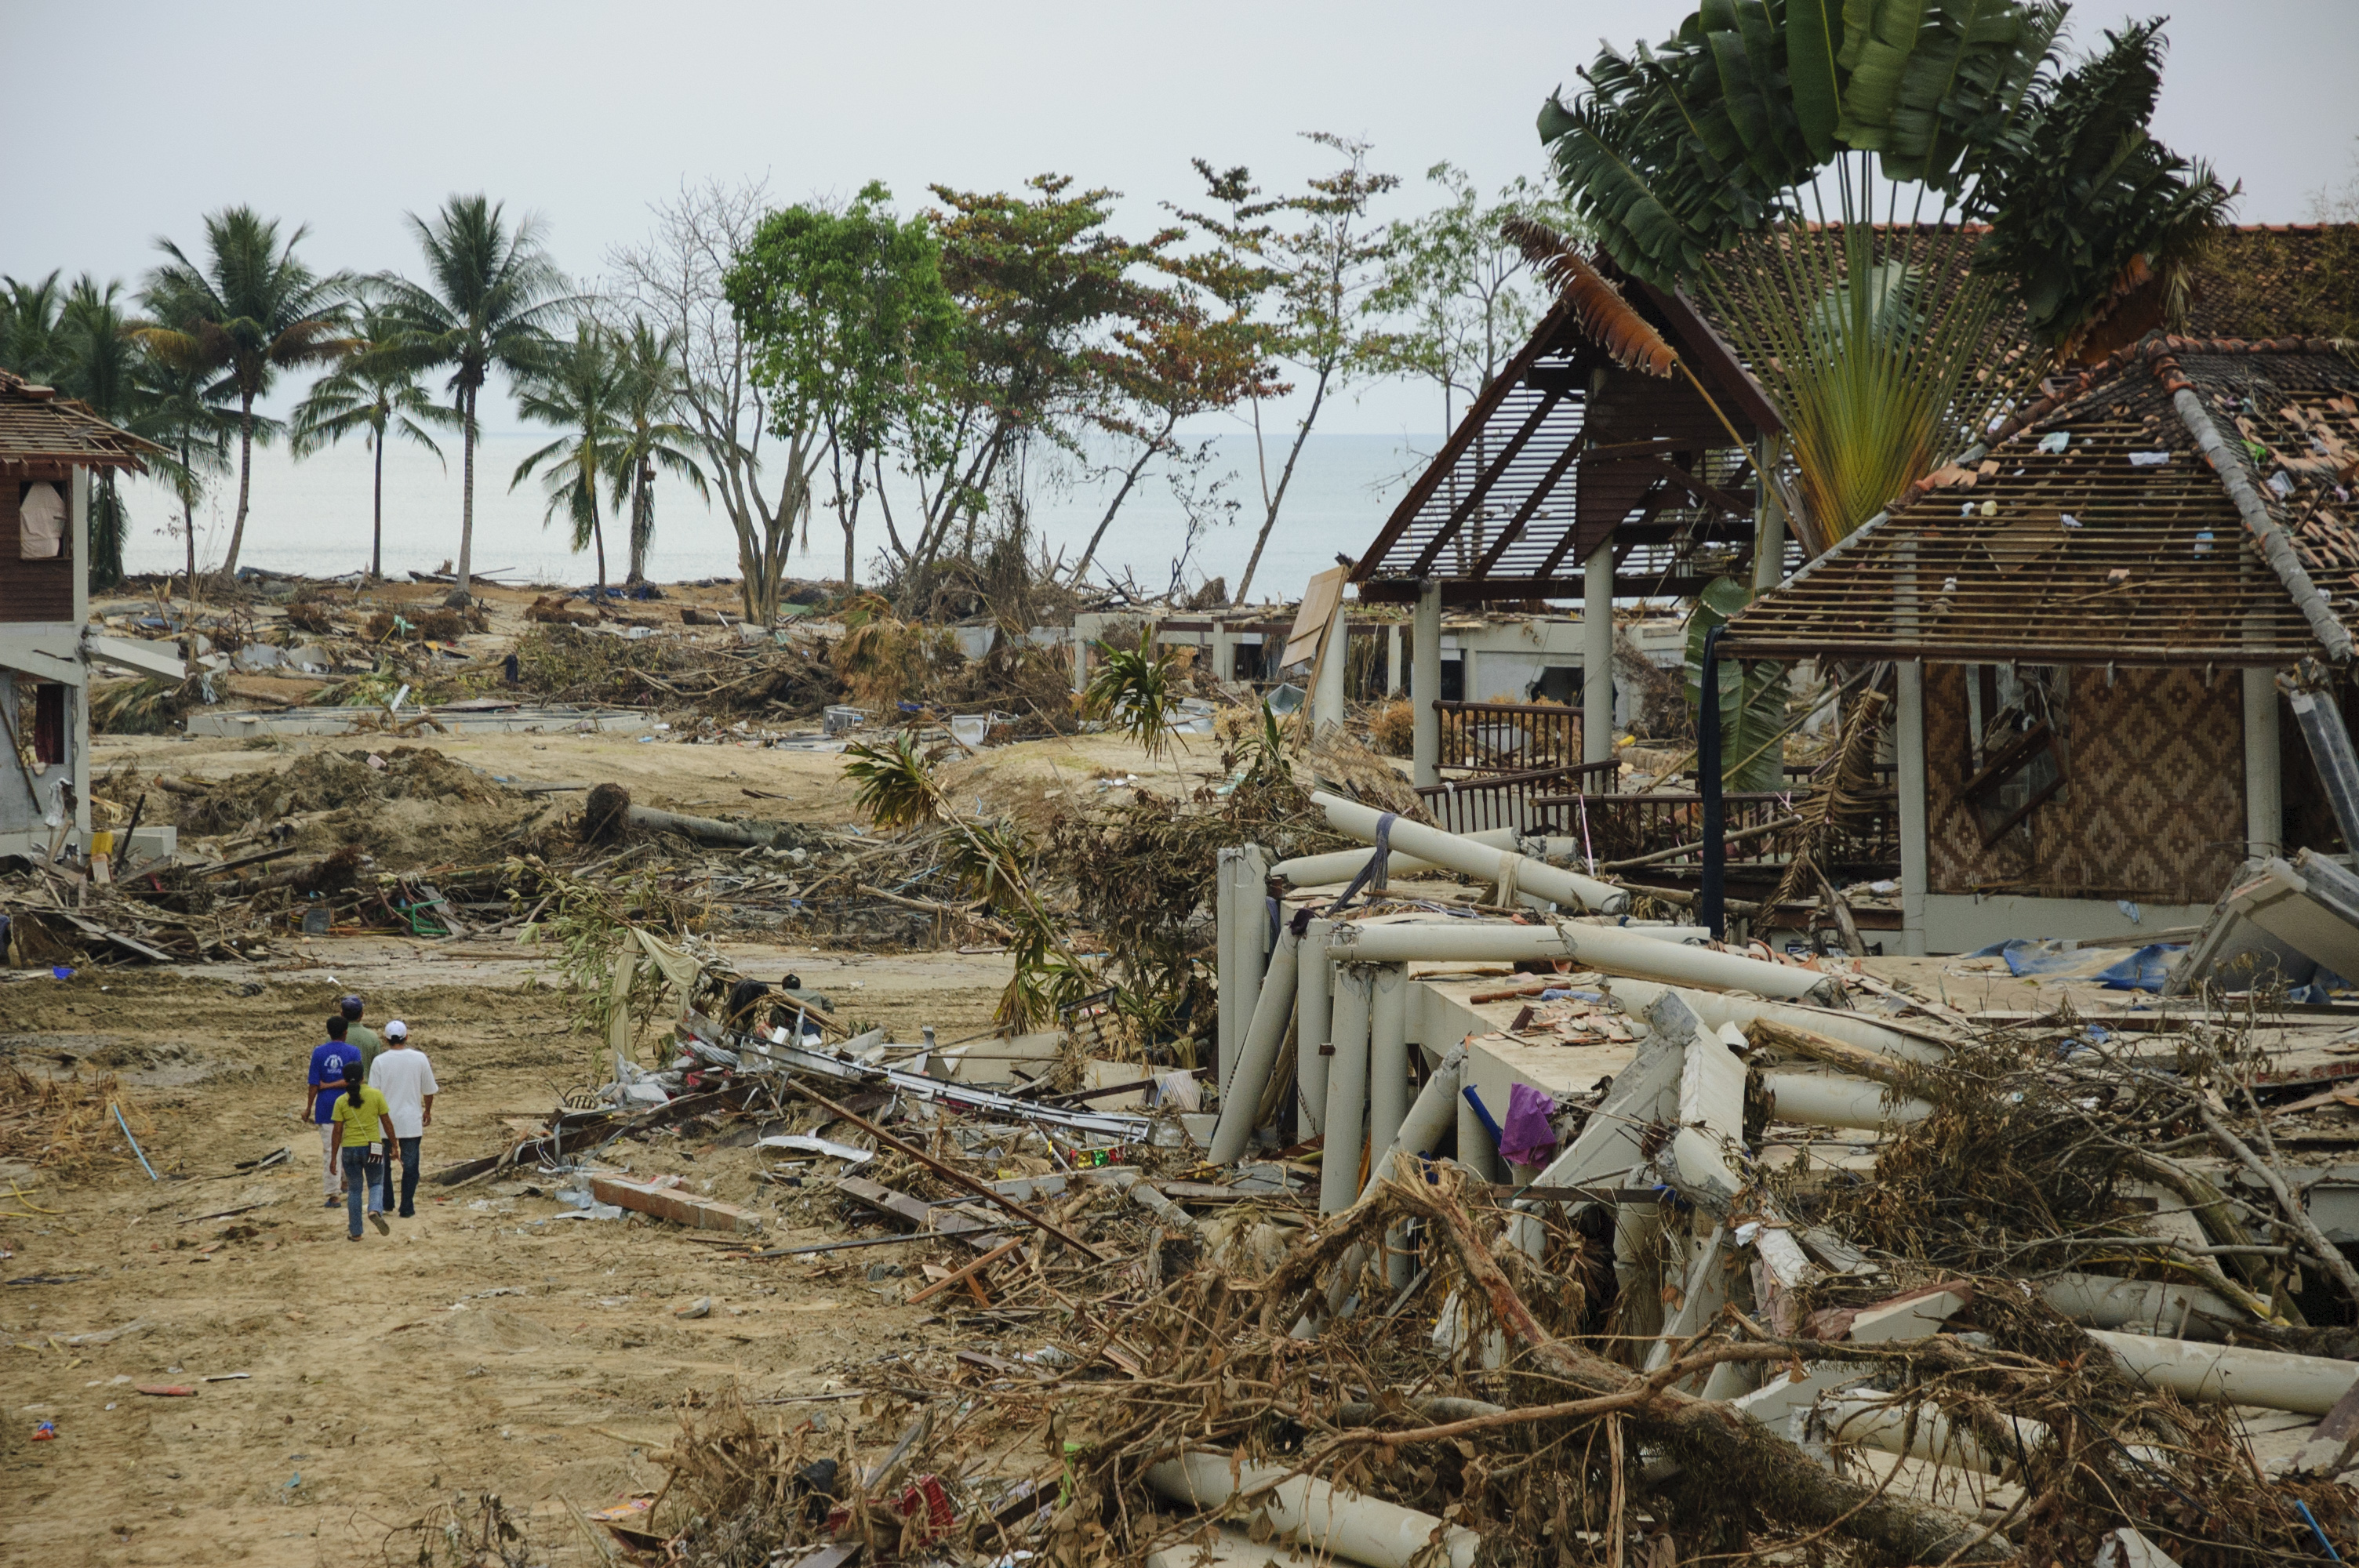 People walk through the remains of a beach resort on Khao Lak several days after the December 26, 2004 tsunami that devastated Southeast Asia
